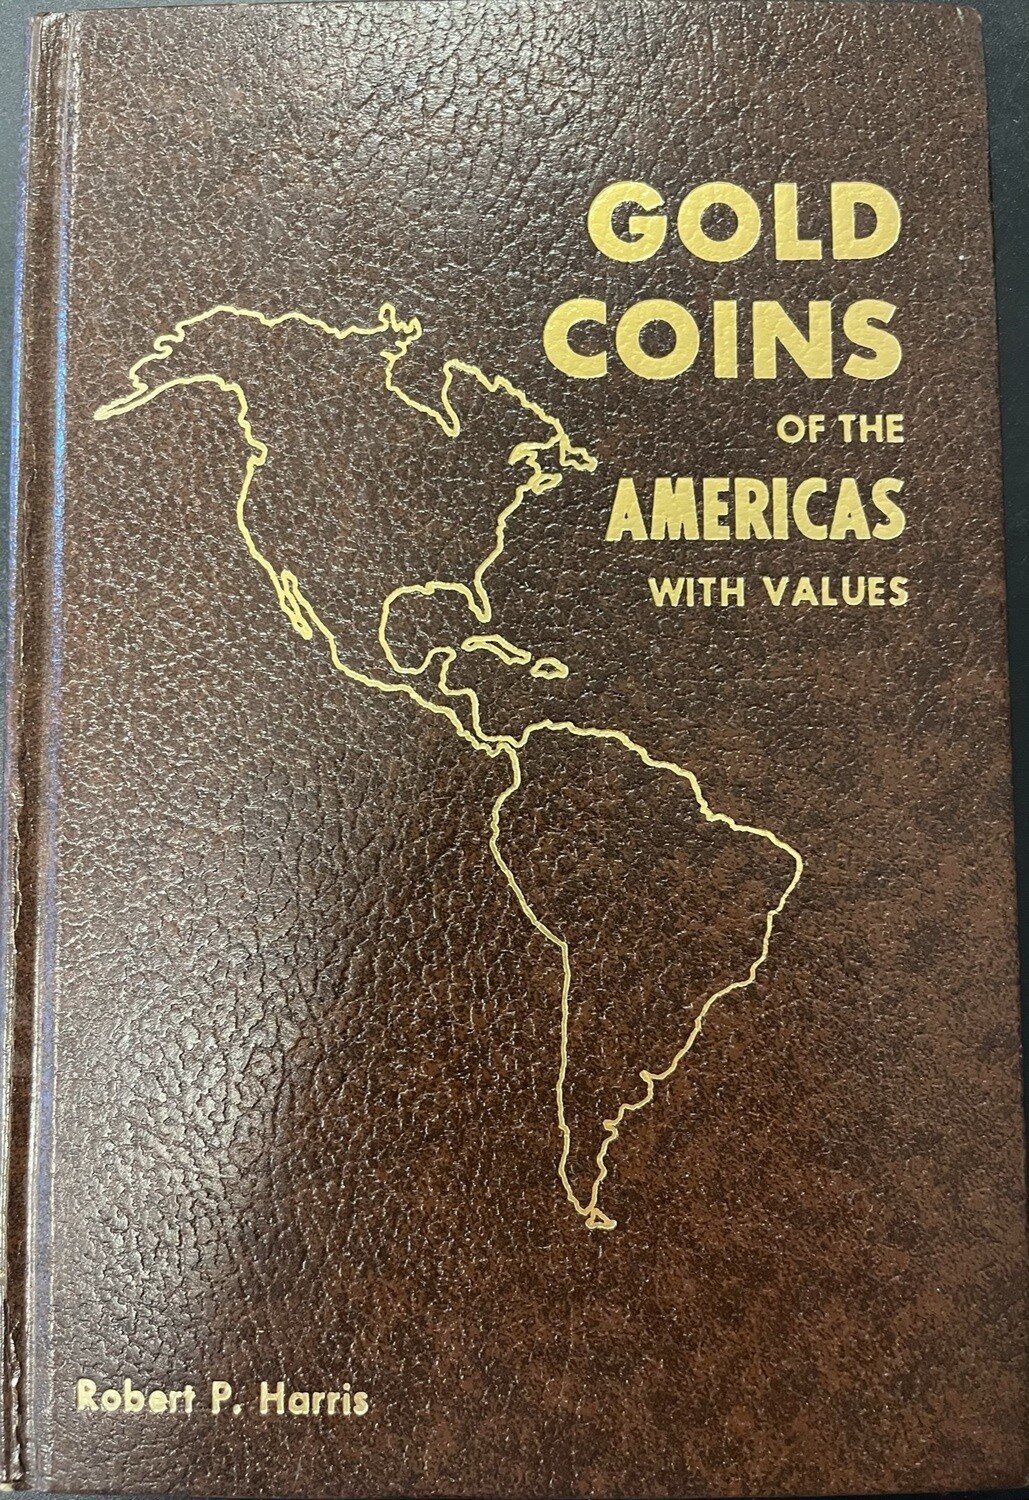 Harris, Robert P. Gold Coins Of The Americas With Values